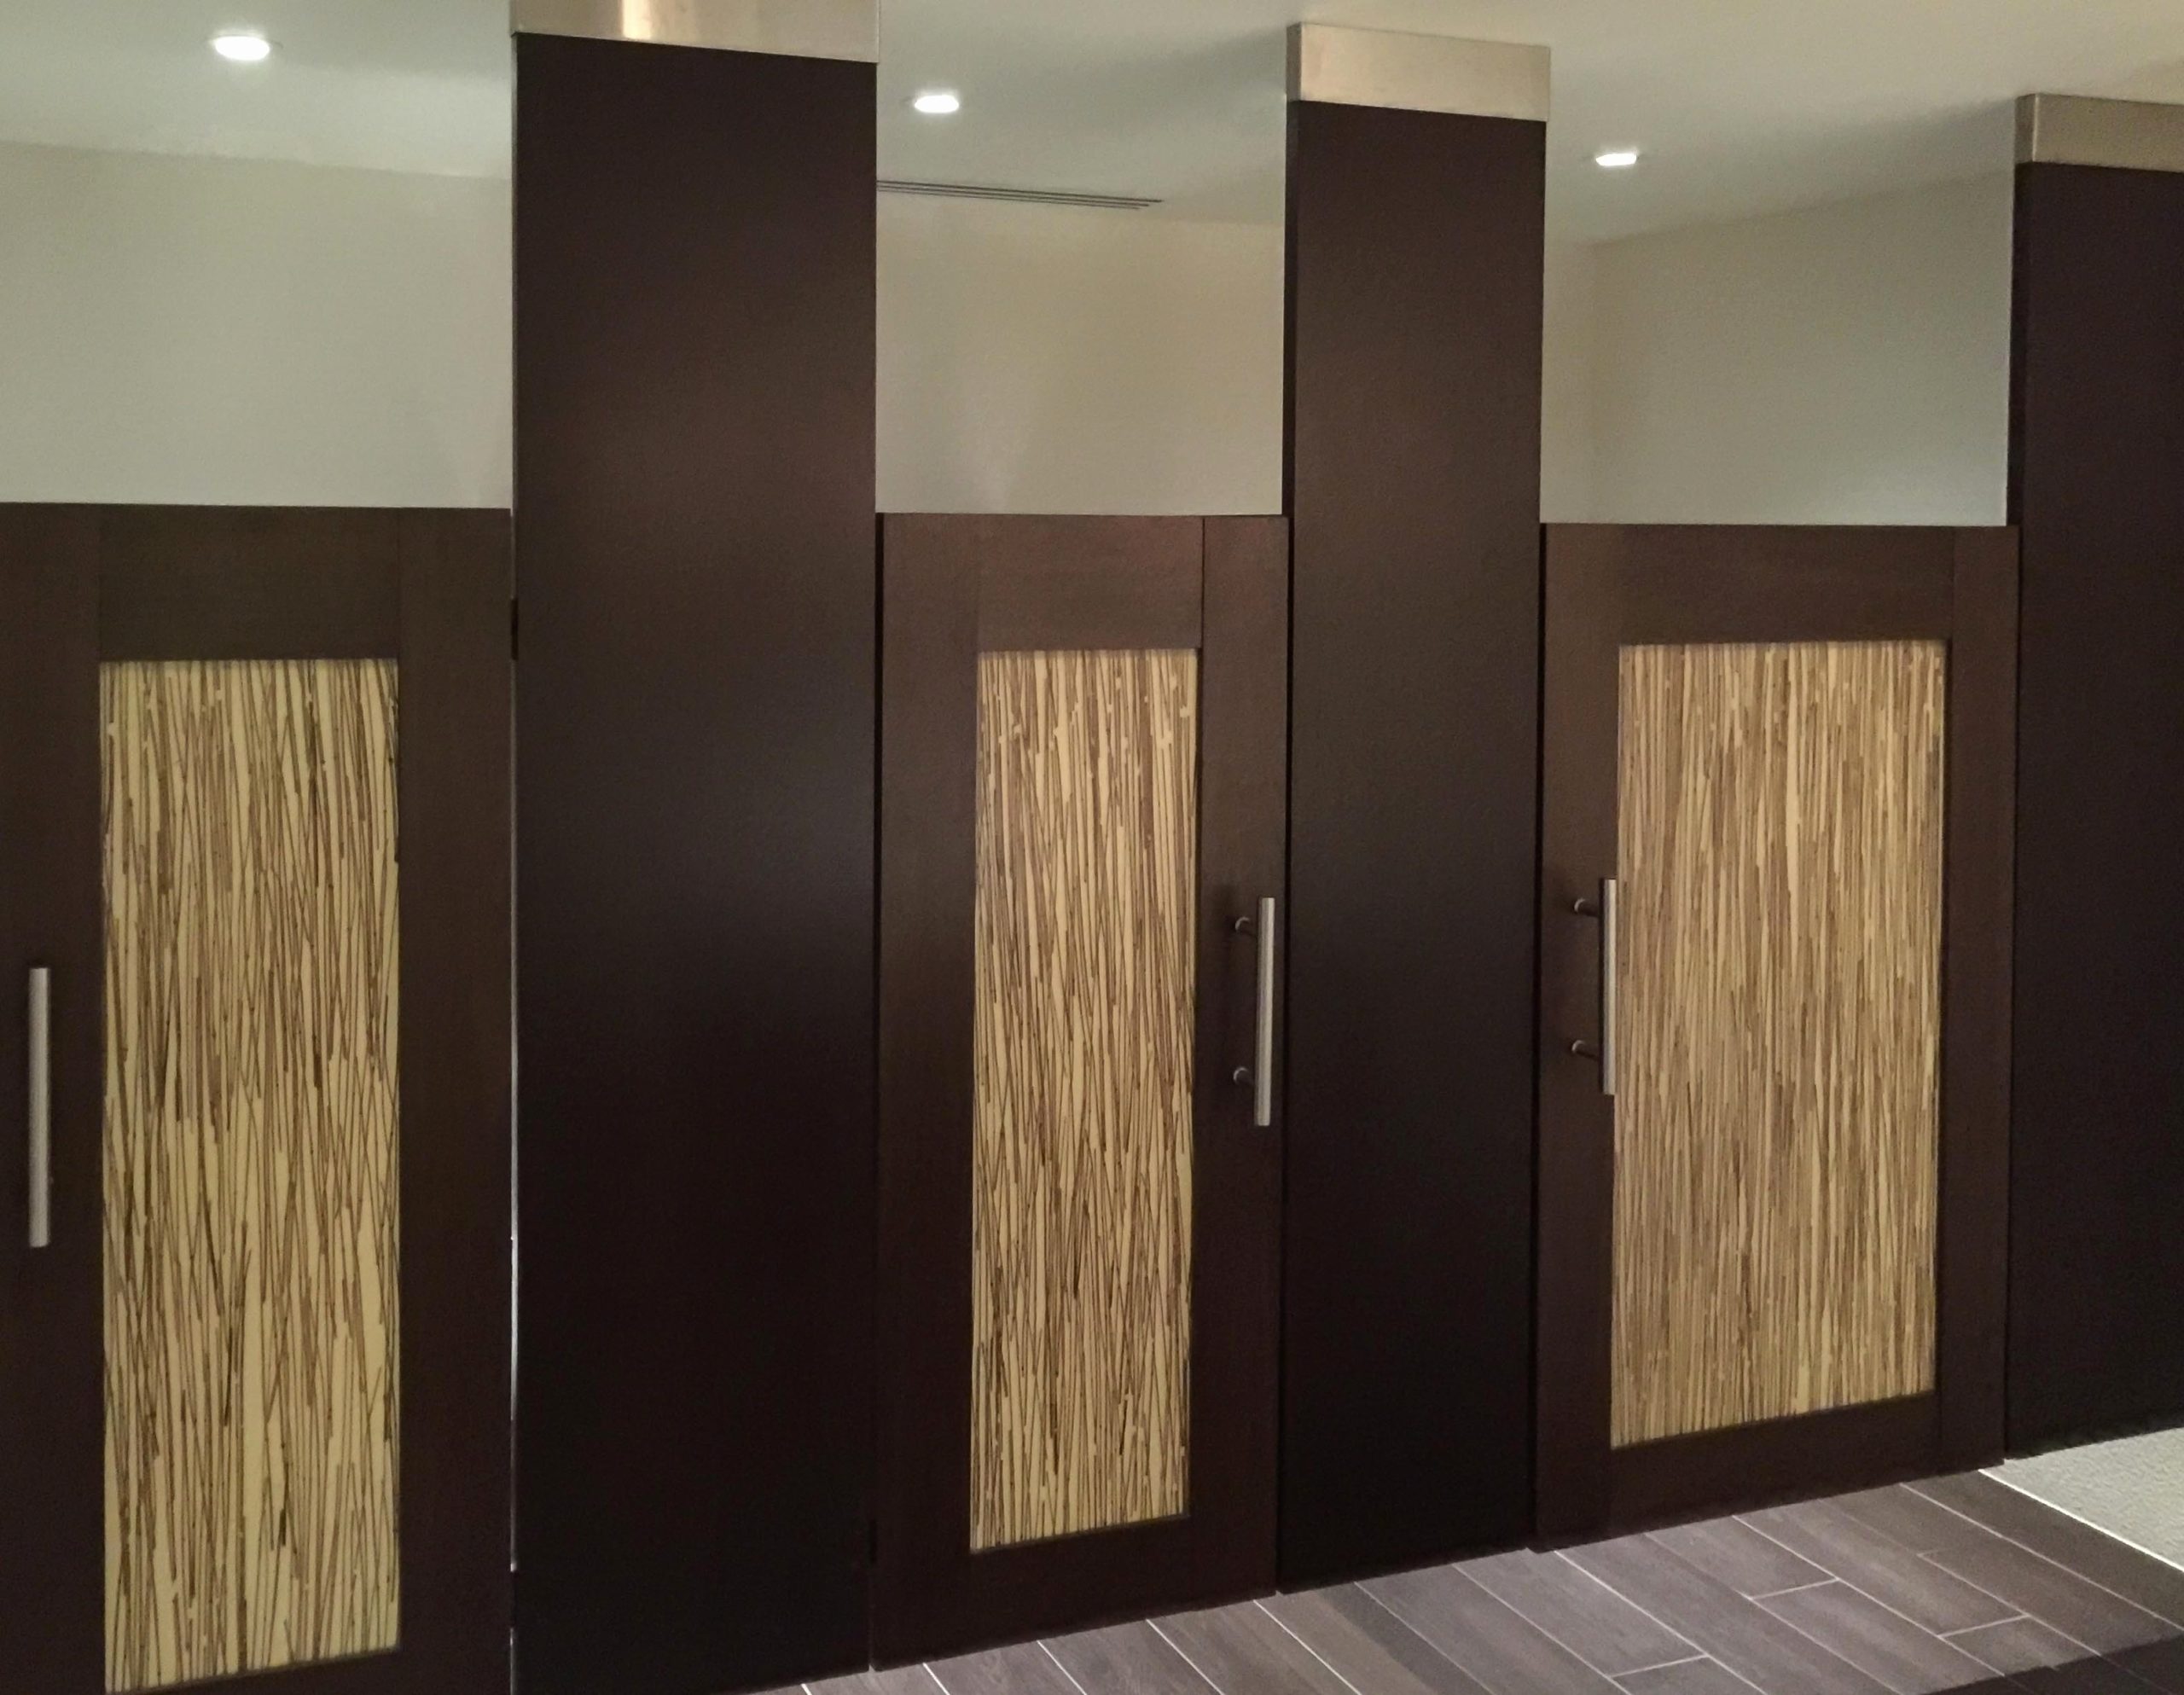 How To Remove Bathroom Stall Doors